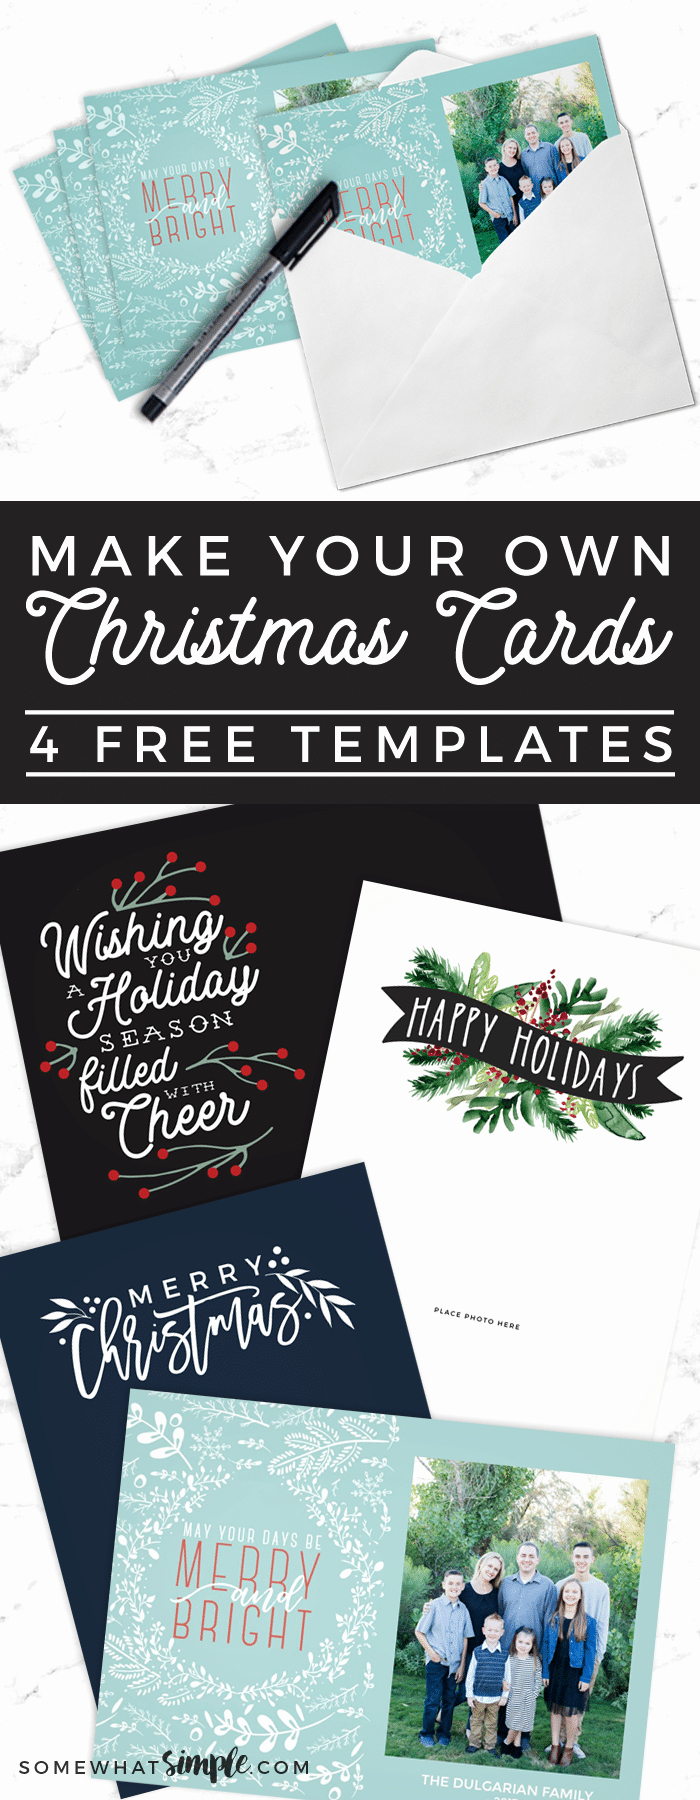 Free Printable Postcard Templates New Make Your Own Christmas Cards for Free somewhat